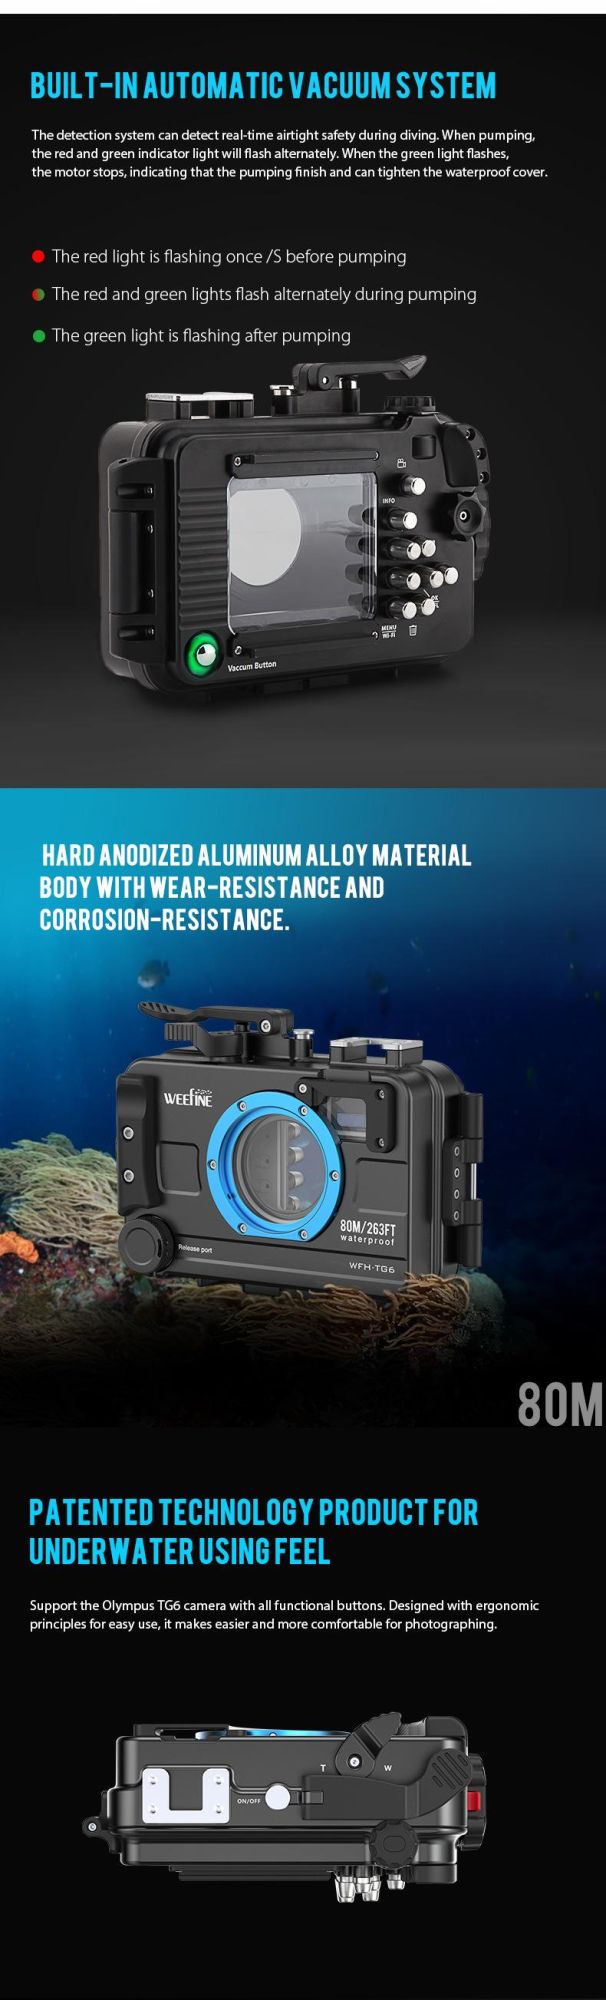 Designed with Ergonomic Principles for Easy-Use Underwater Camera Housing for Photographing